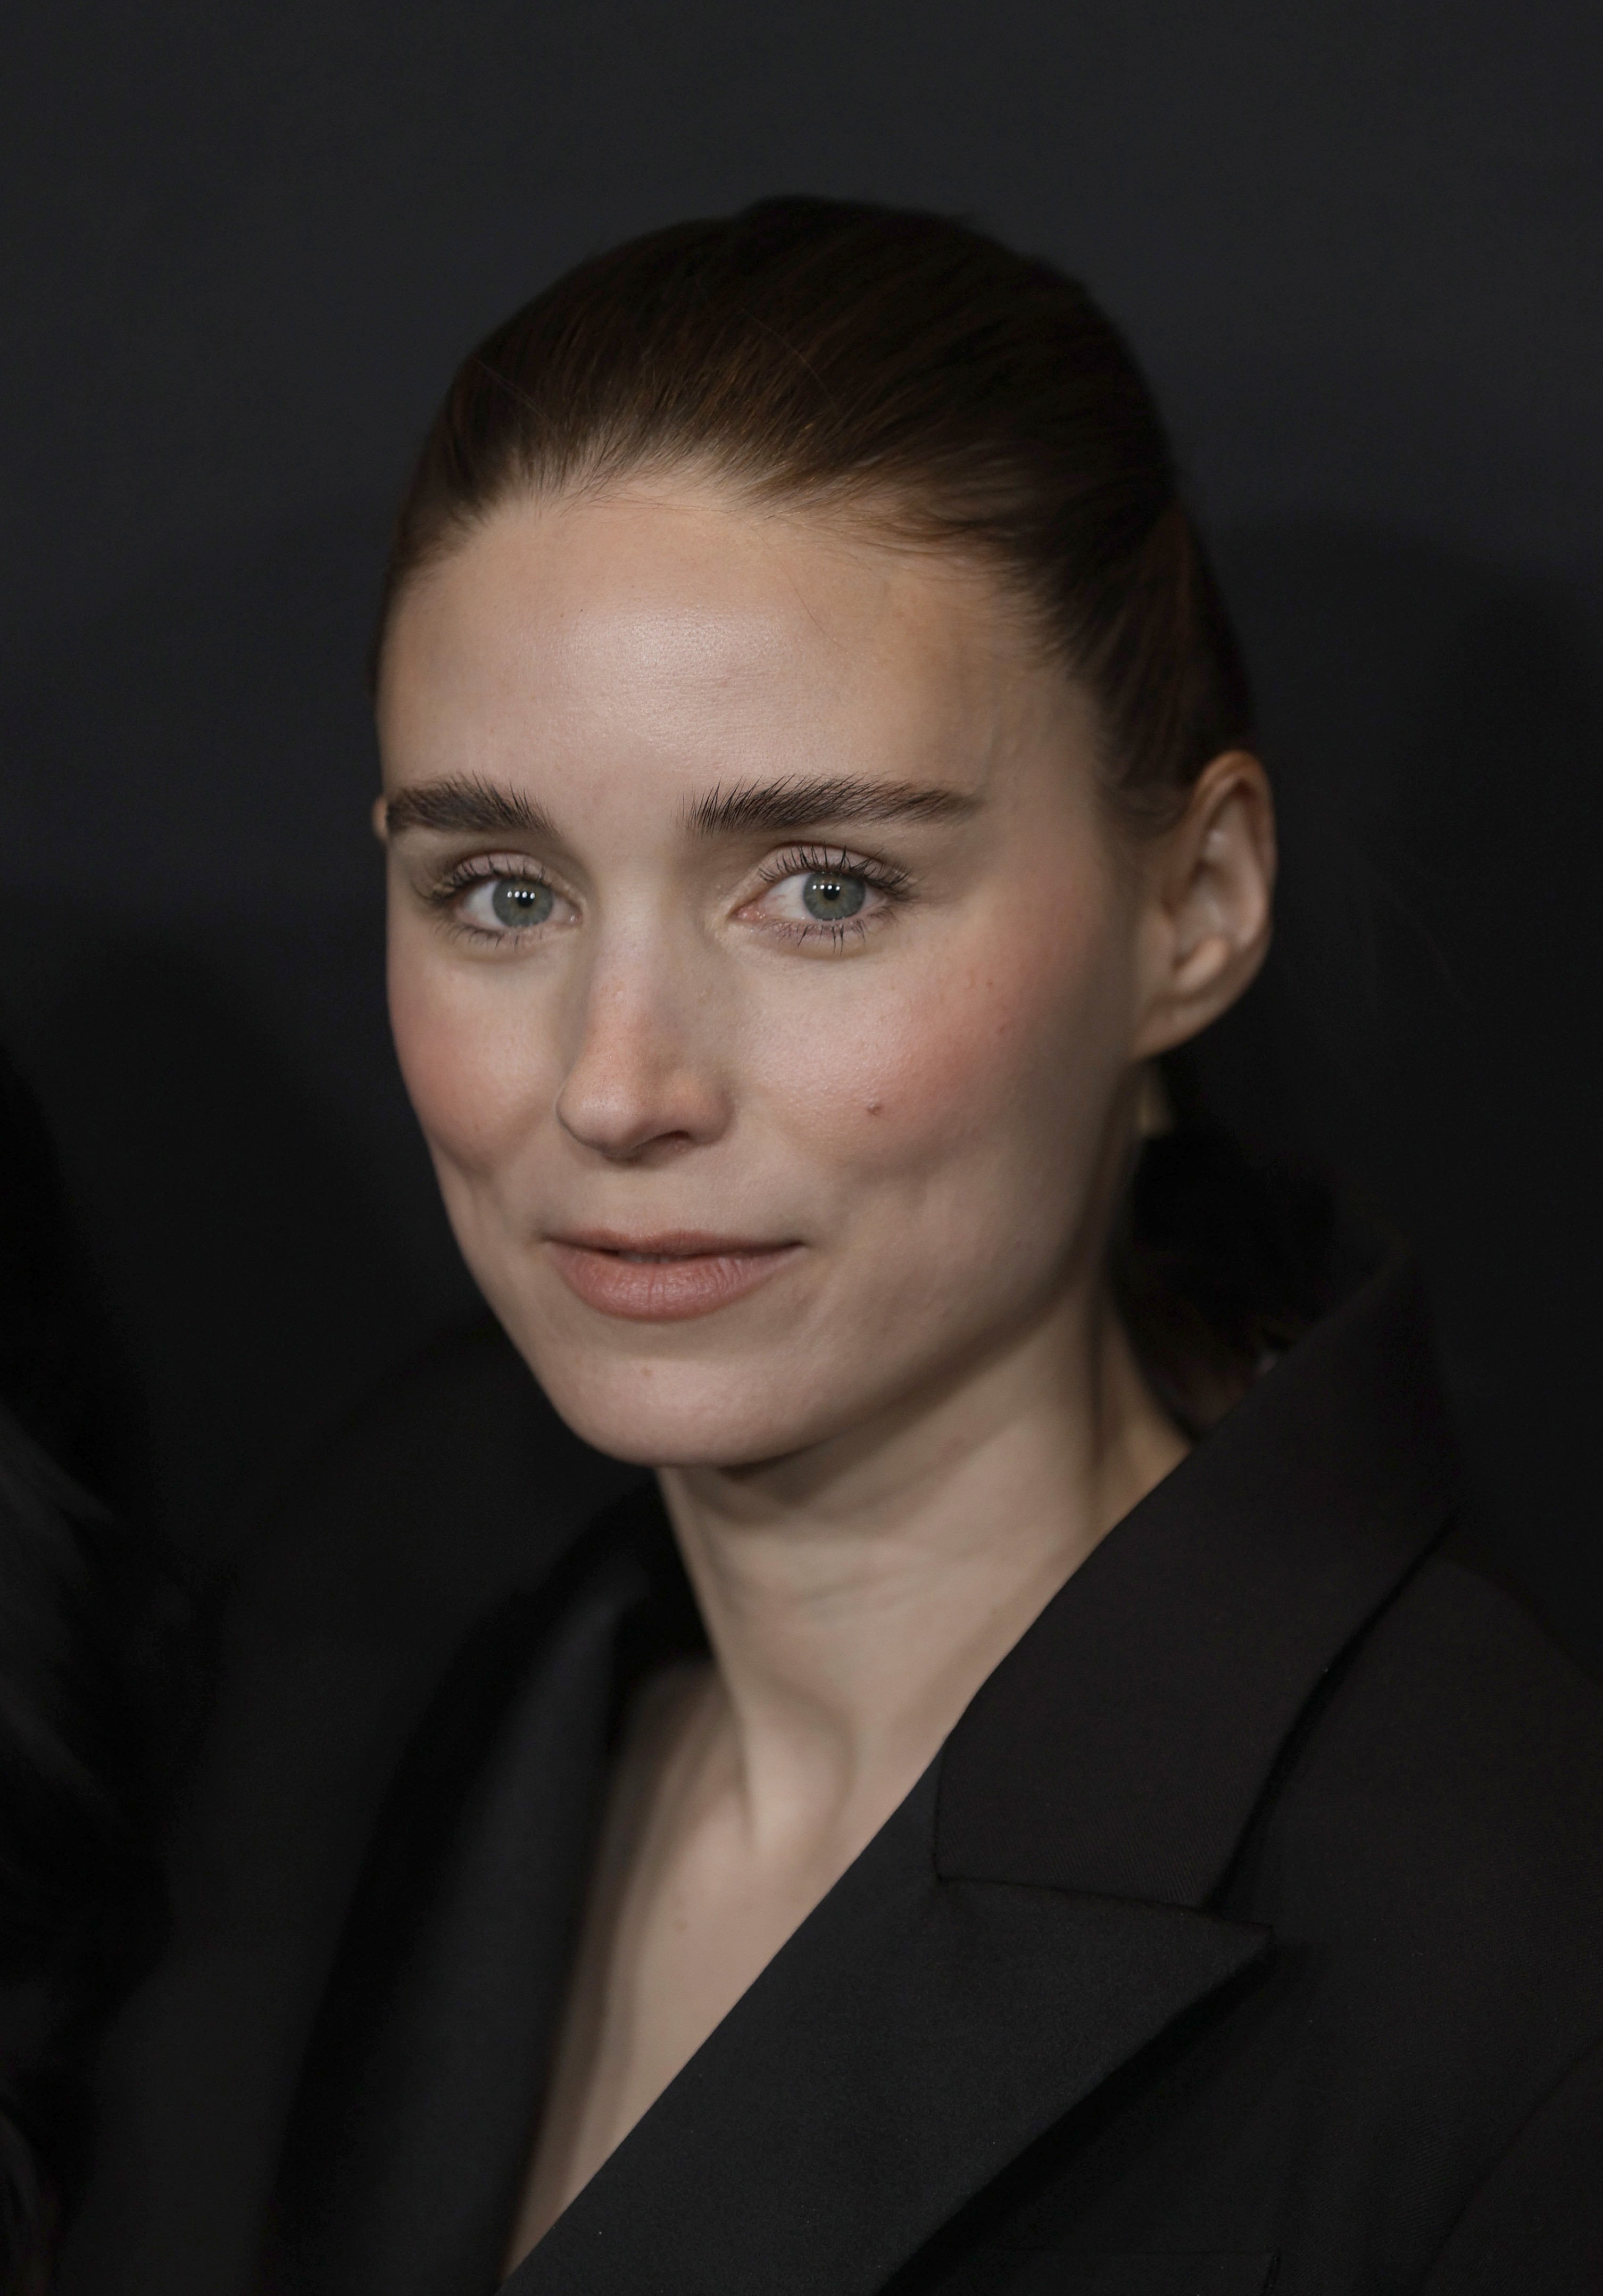 NEW YORK, NEW YORK - DECEMBER 01: Rooney Mara attends "Nightmare Alley" World Premiere at Alice Tully Hall, Lincoln Center on December 01, 2021 in New York City. (Photo by Michael Loccisano/Getty Images) (Foto: Getty Images)